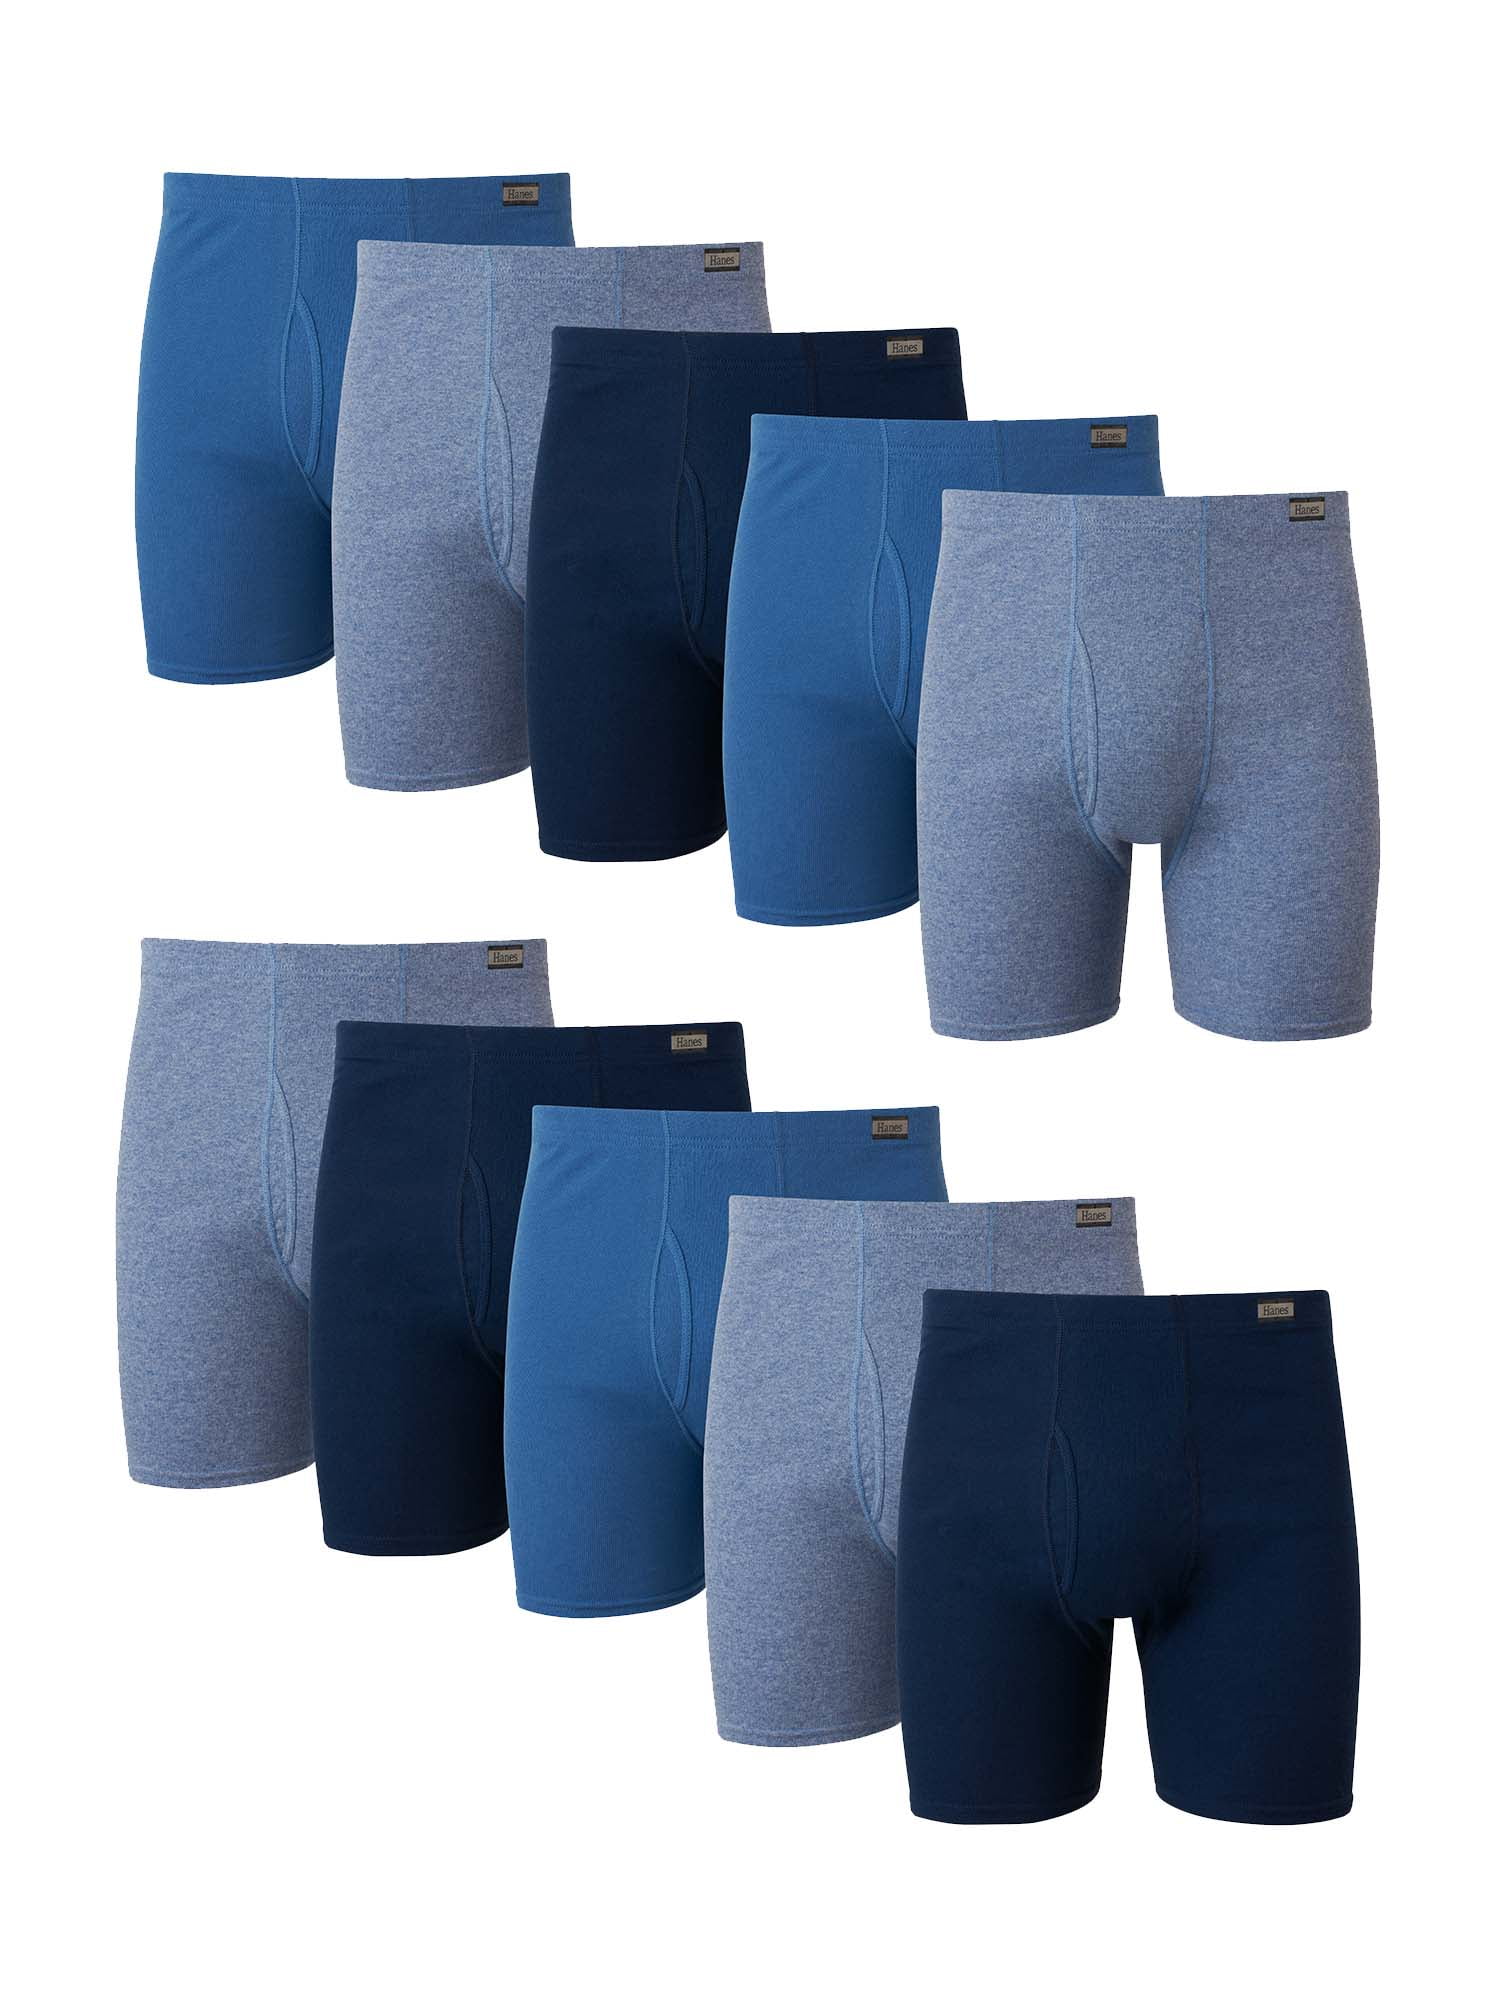 Details about   Hanes Men's 10-Pack Assorted Boxer Brief 